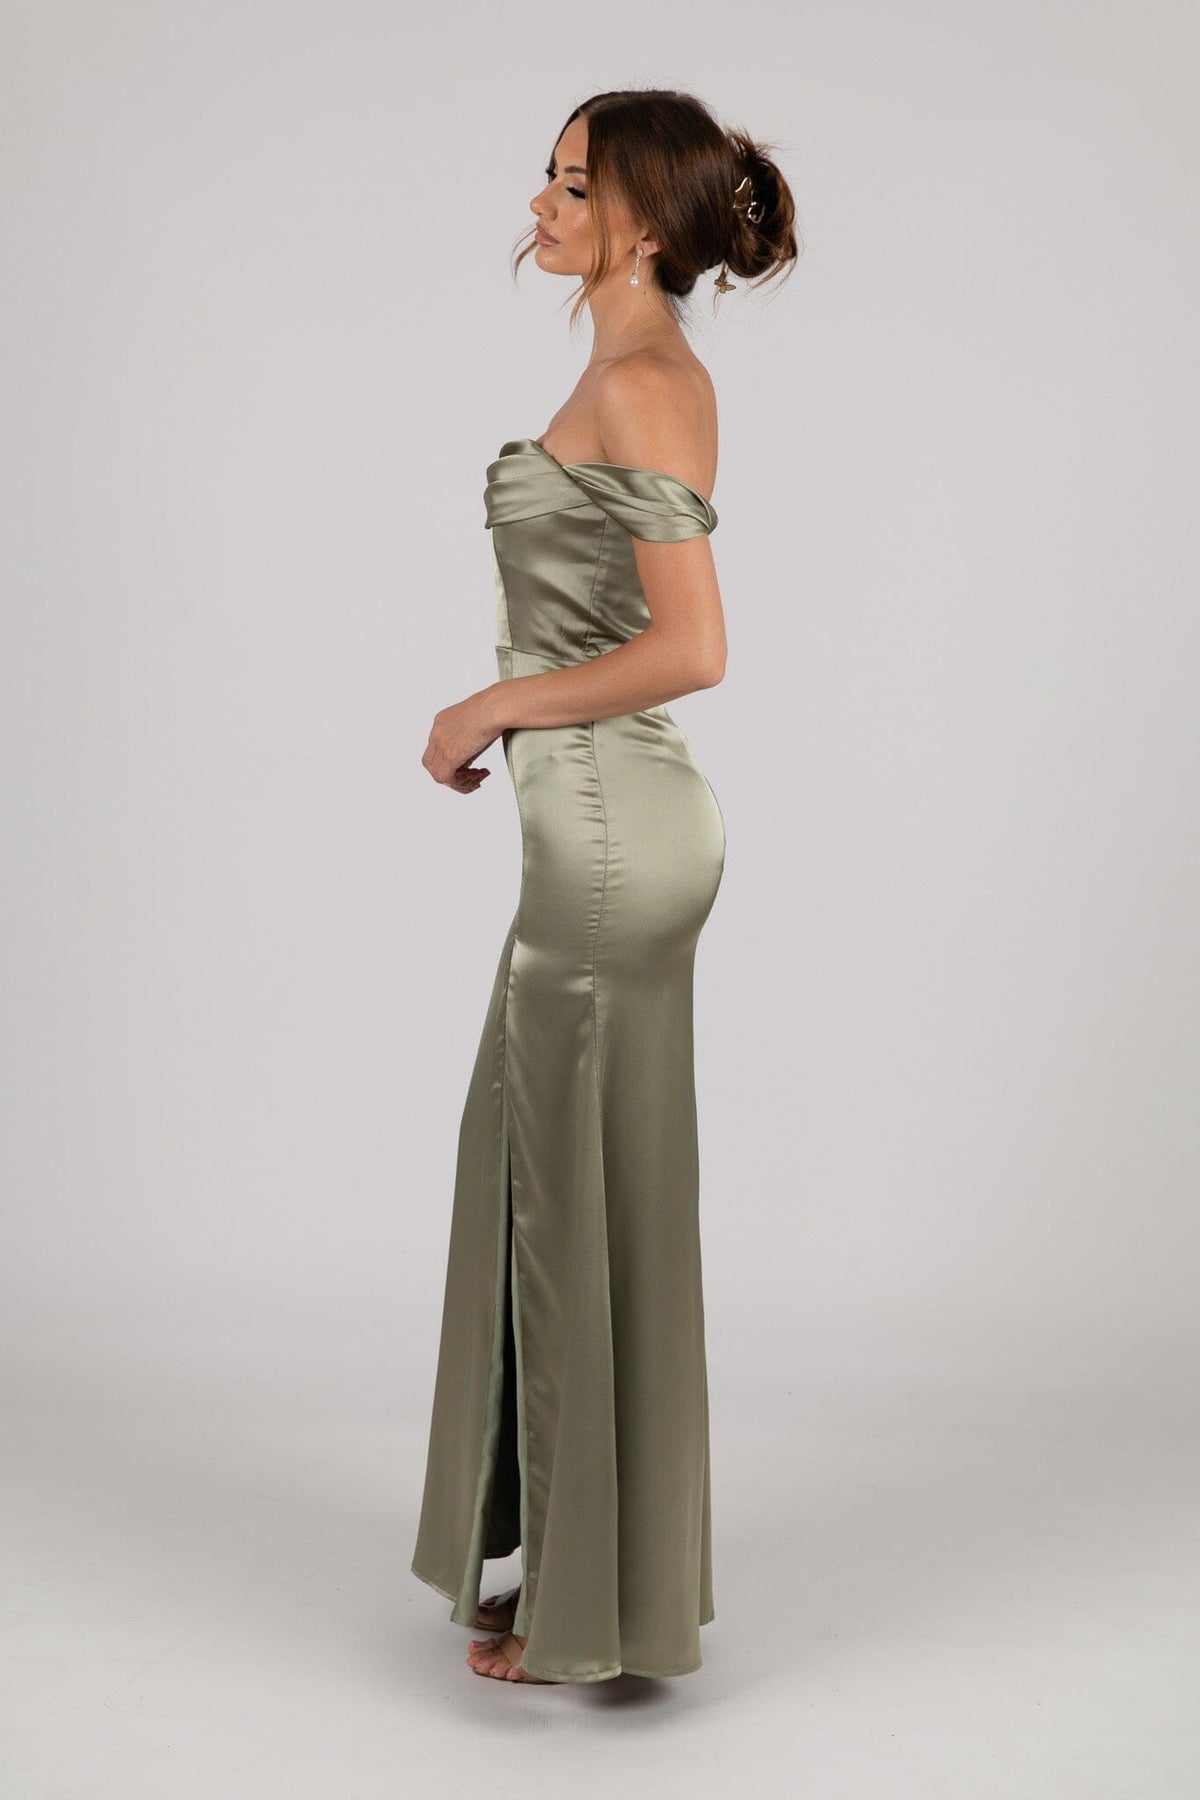 Side Image of Sage Green Strapless Satin Maxi Dress with Draped Detail at Bust, Detachable Off Shoulder Sleeves and Side Slit